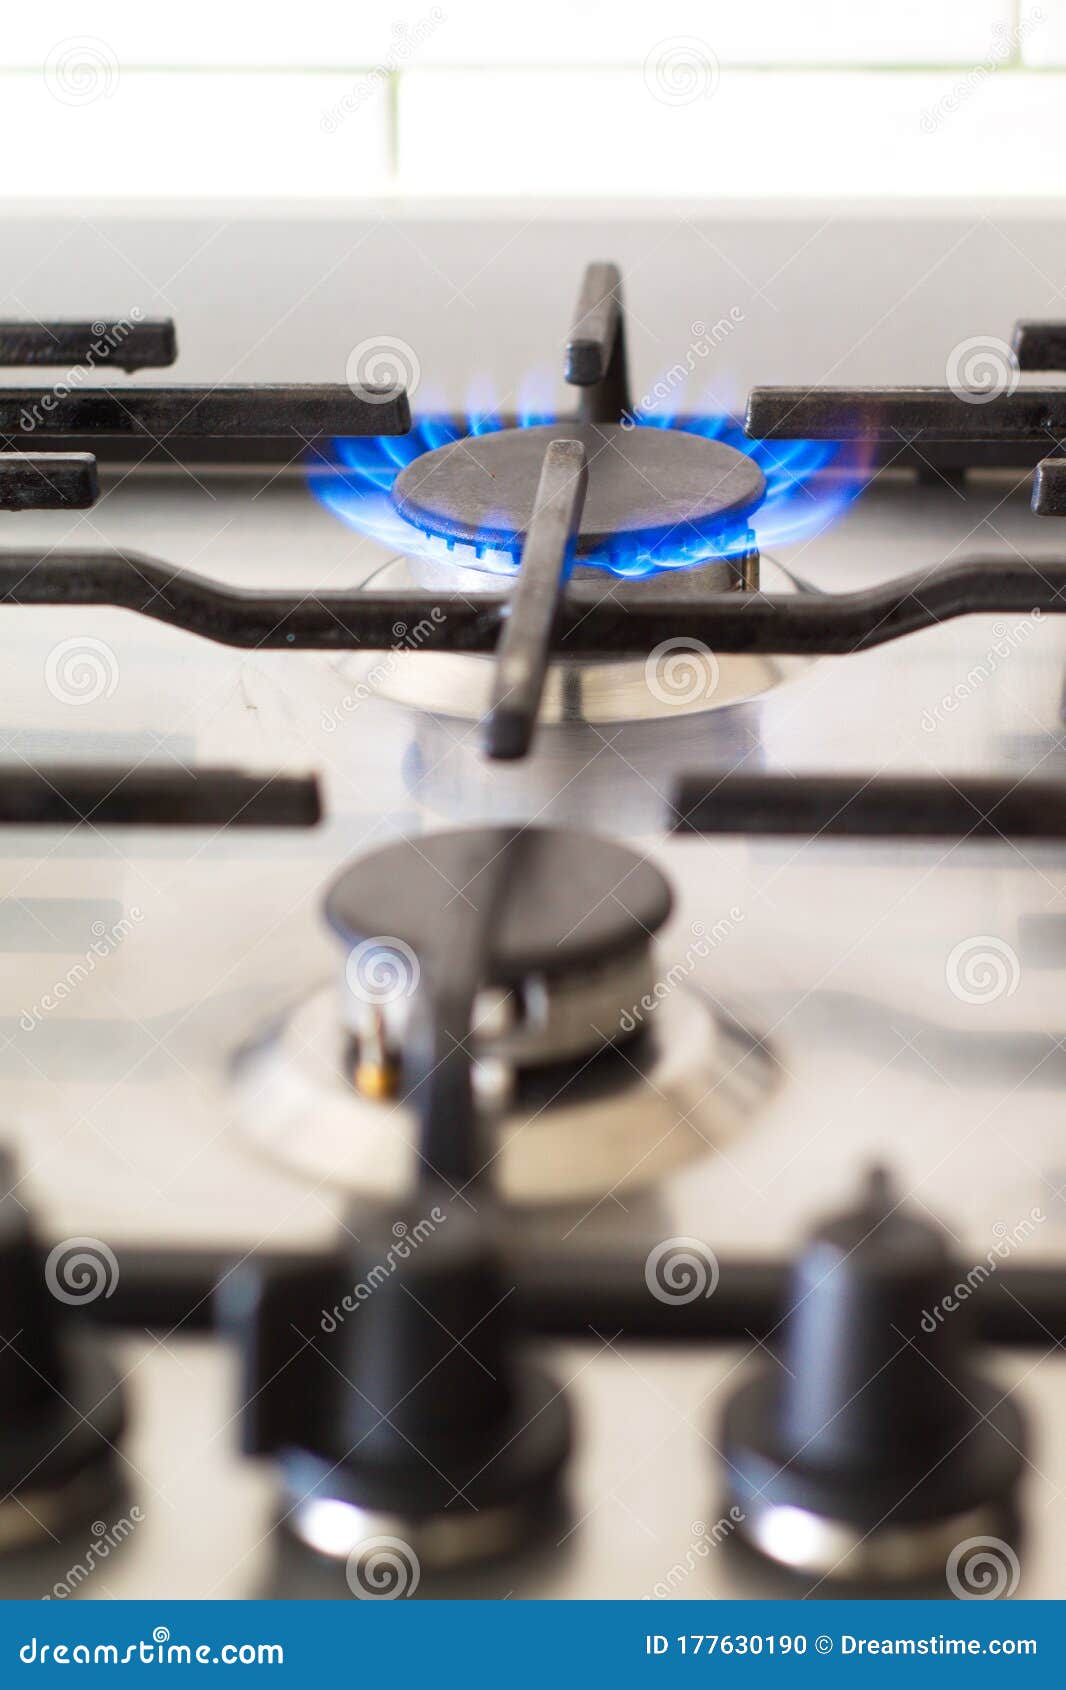 the spanish government prohibits cutting off the gas supply